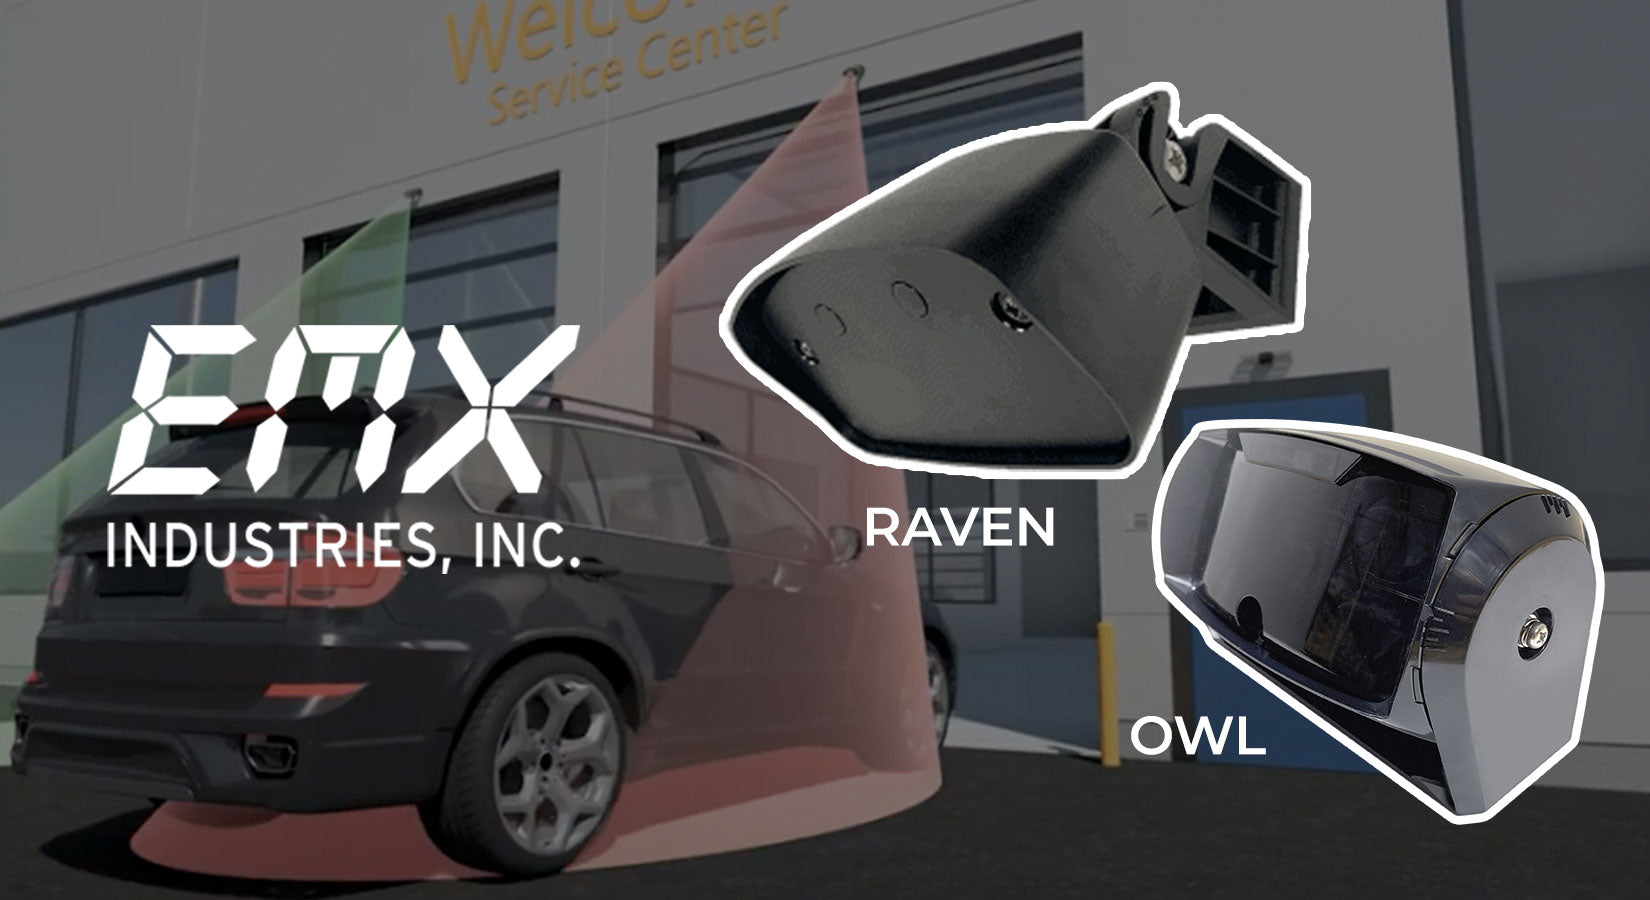 Get the Control You Need with EMX RAVEN & OWL Units | All Security Equipment